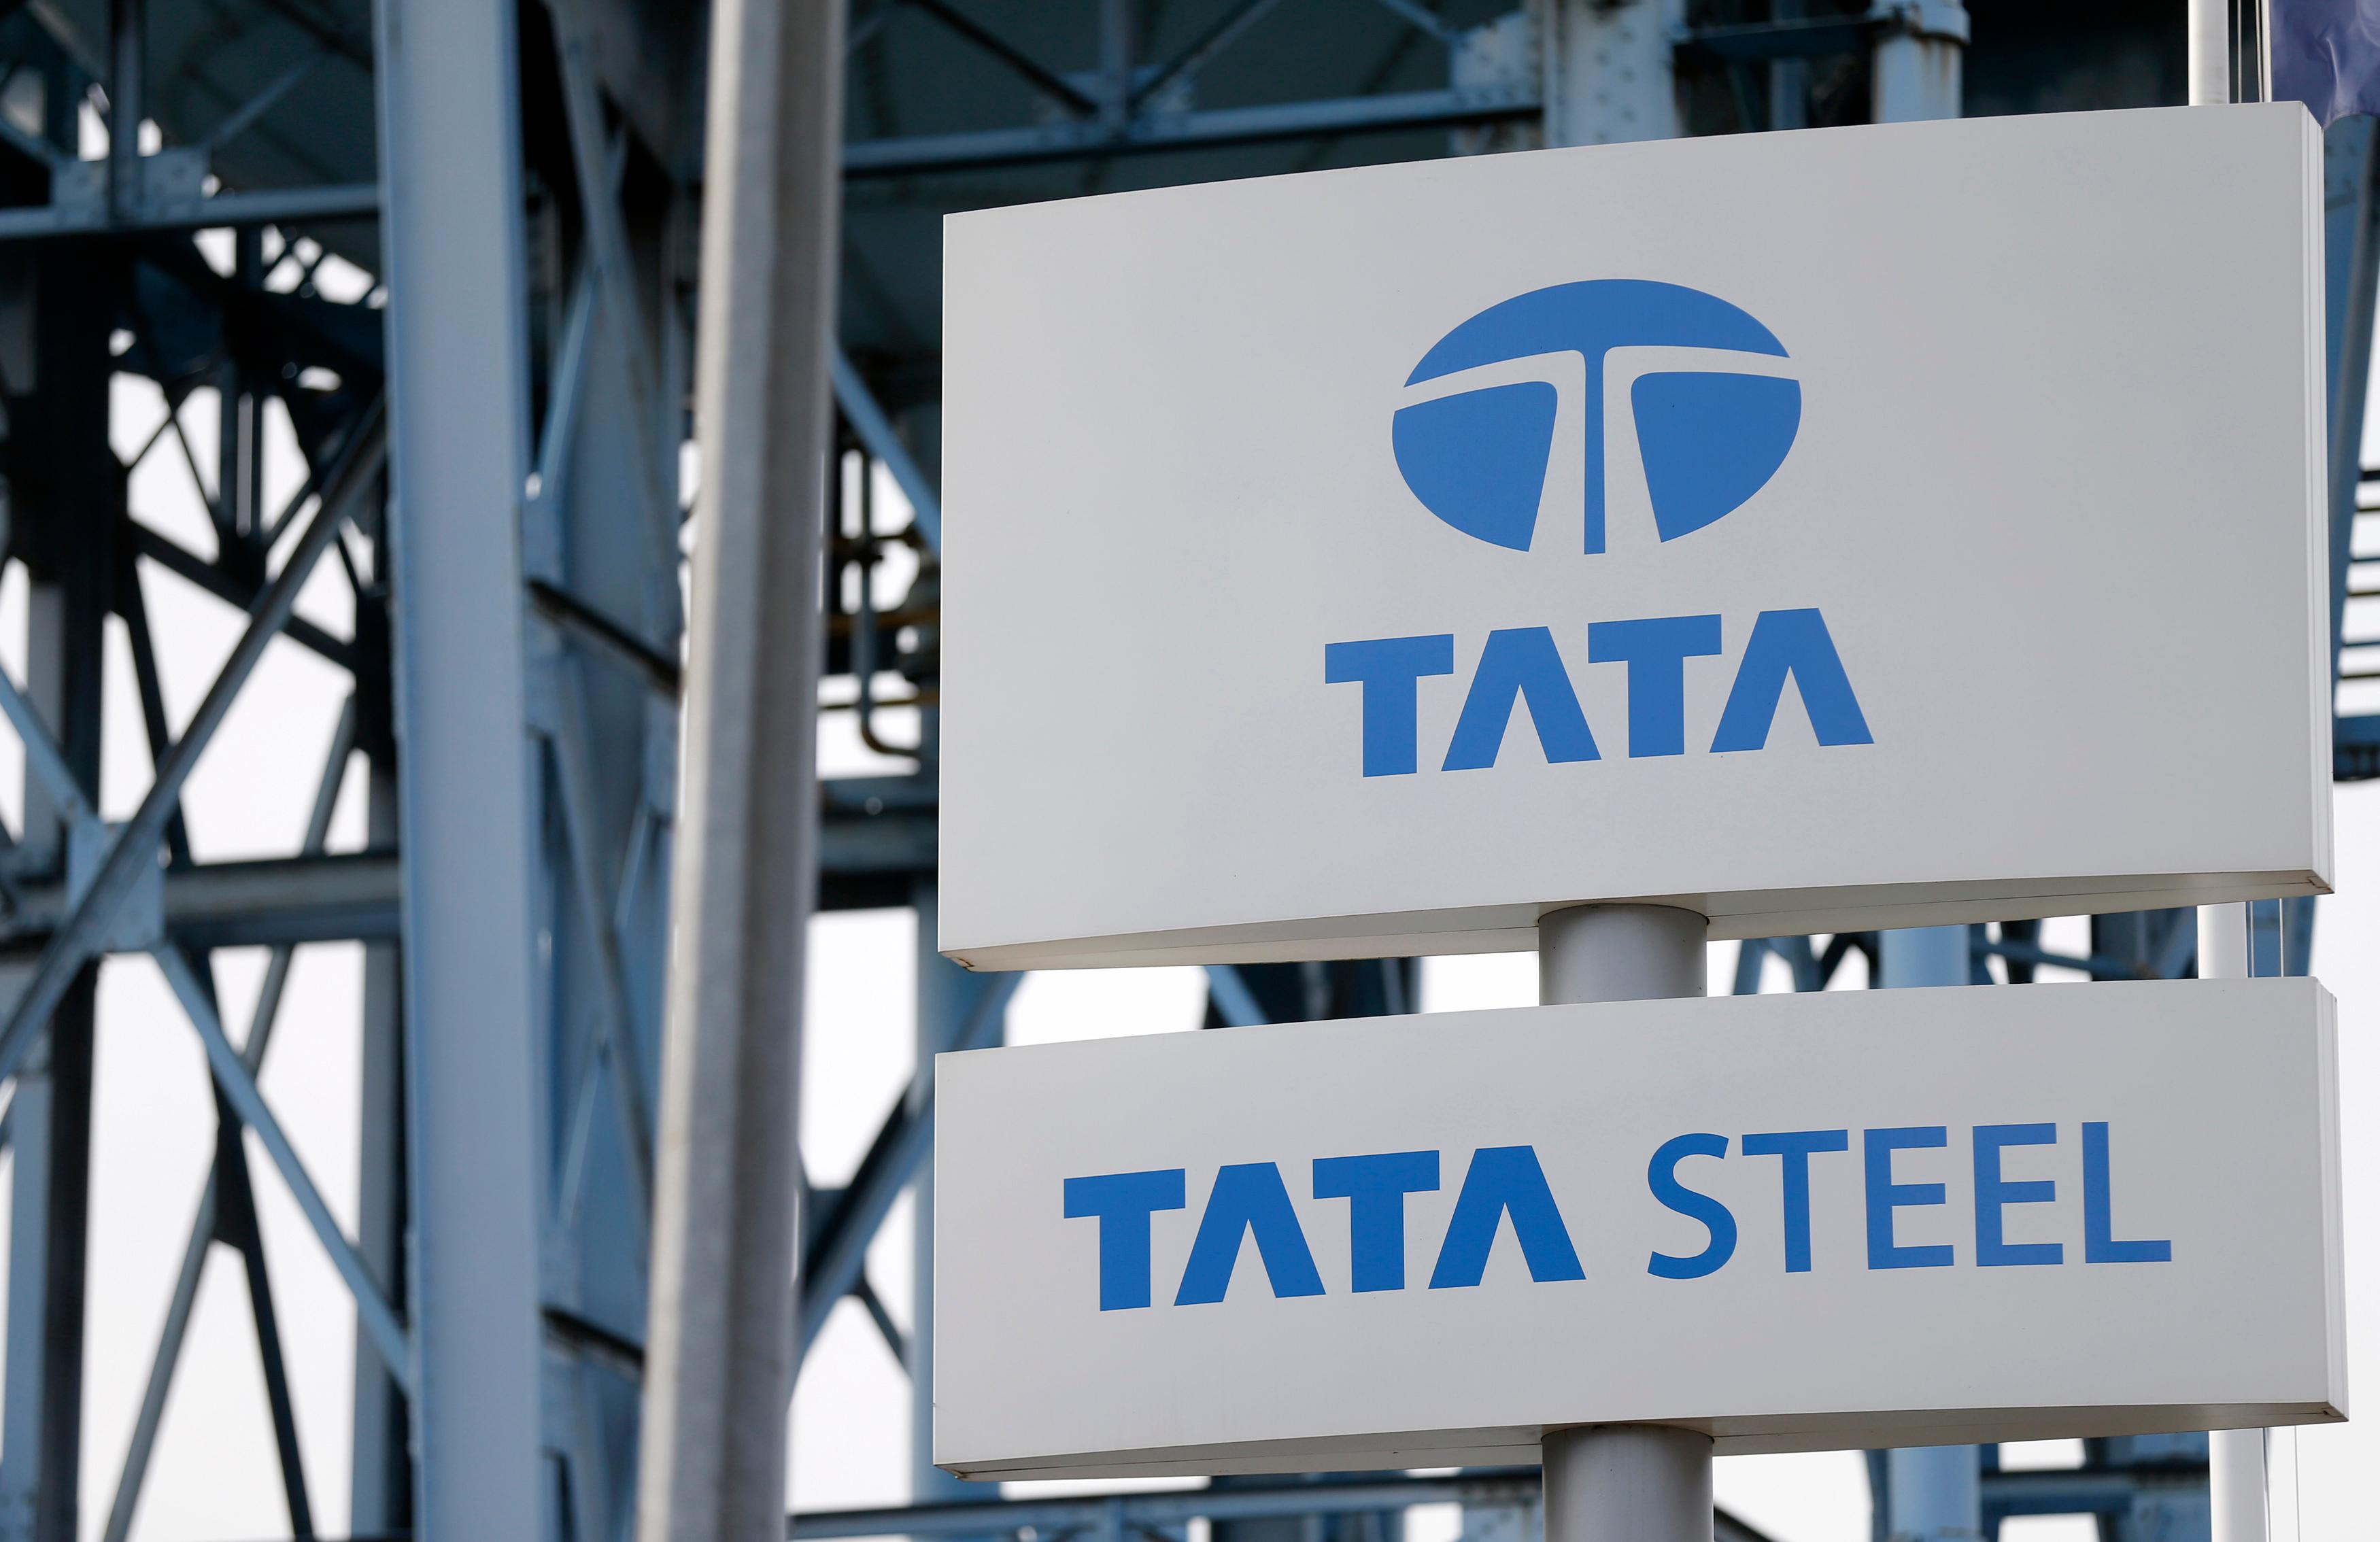 Tata Steel-controlled JV completes buyout of Canadian iron ore company for $4M